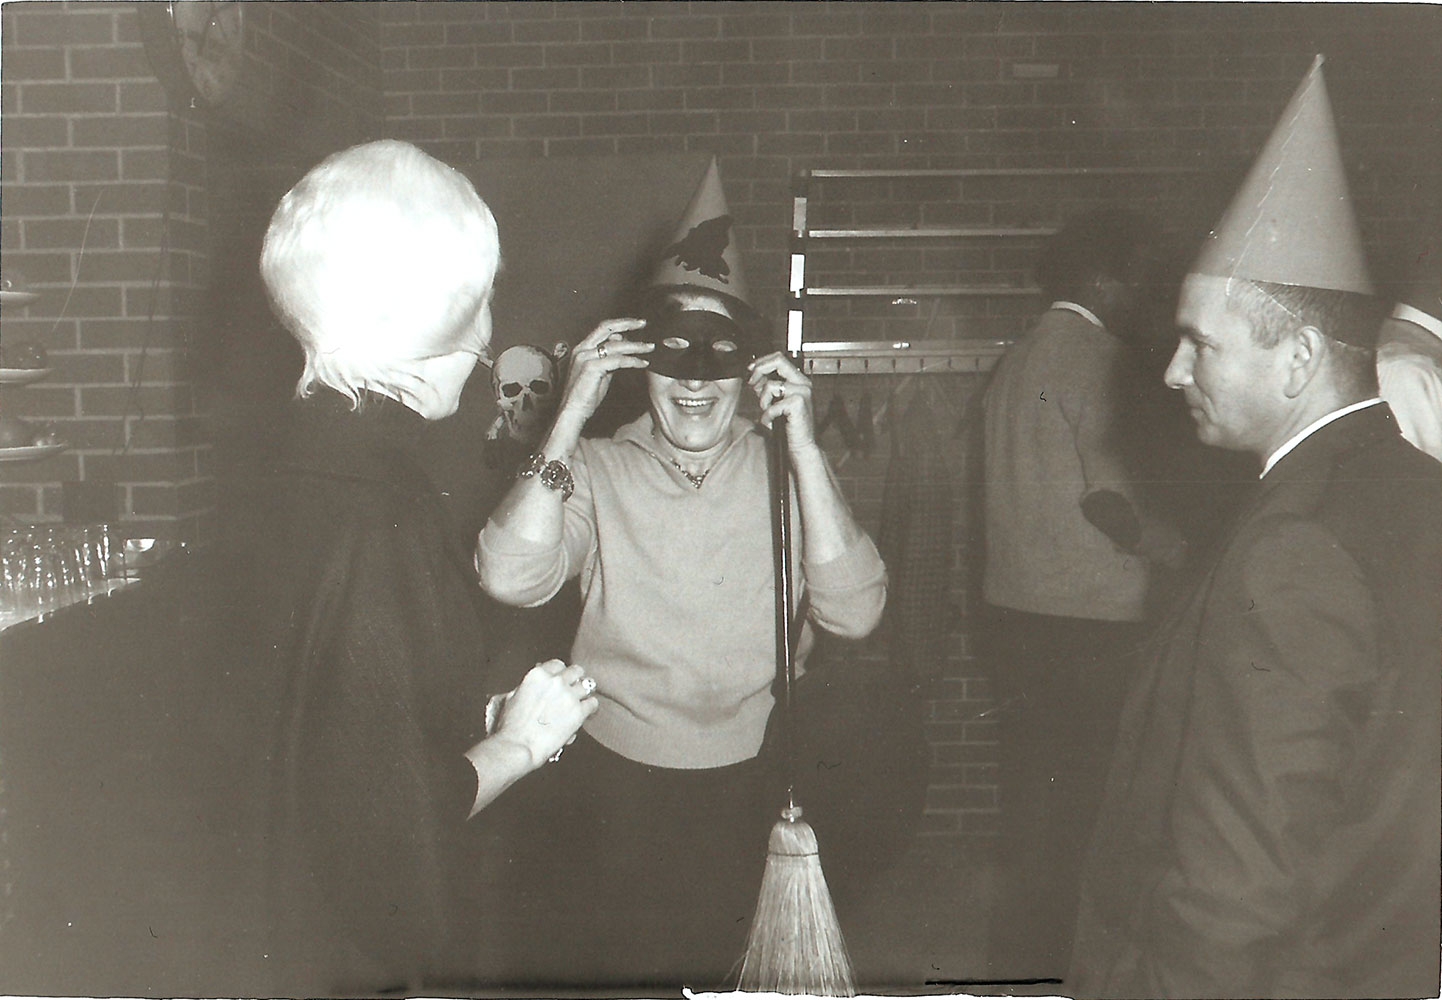 (FNB.2010.11.20) - Halloween Party, c. early 1960s